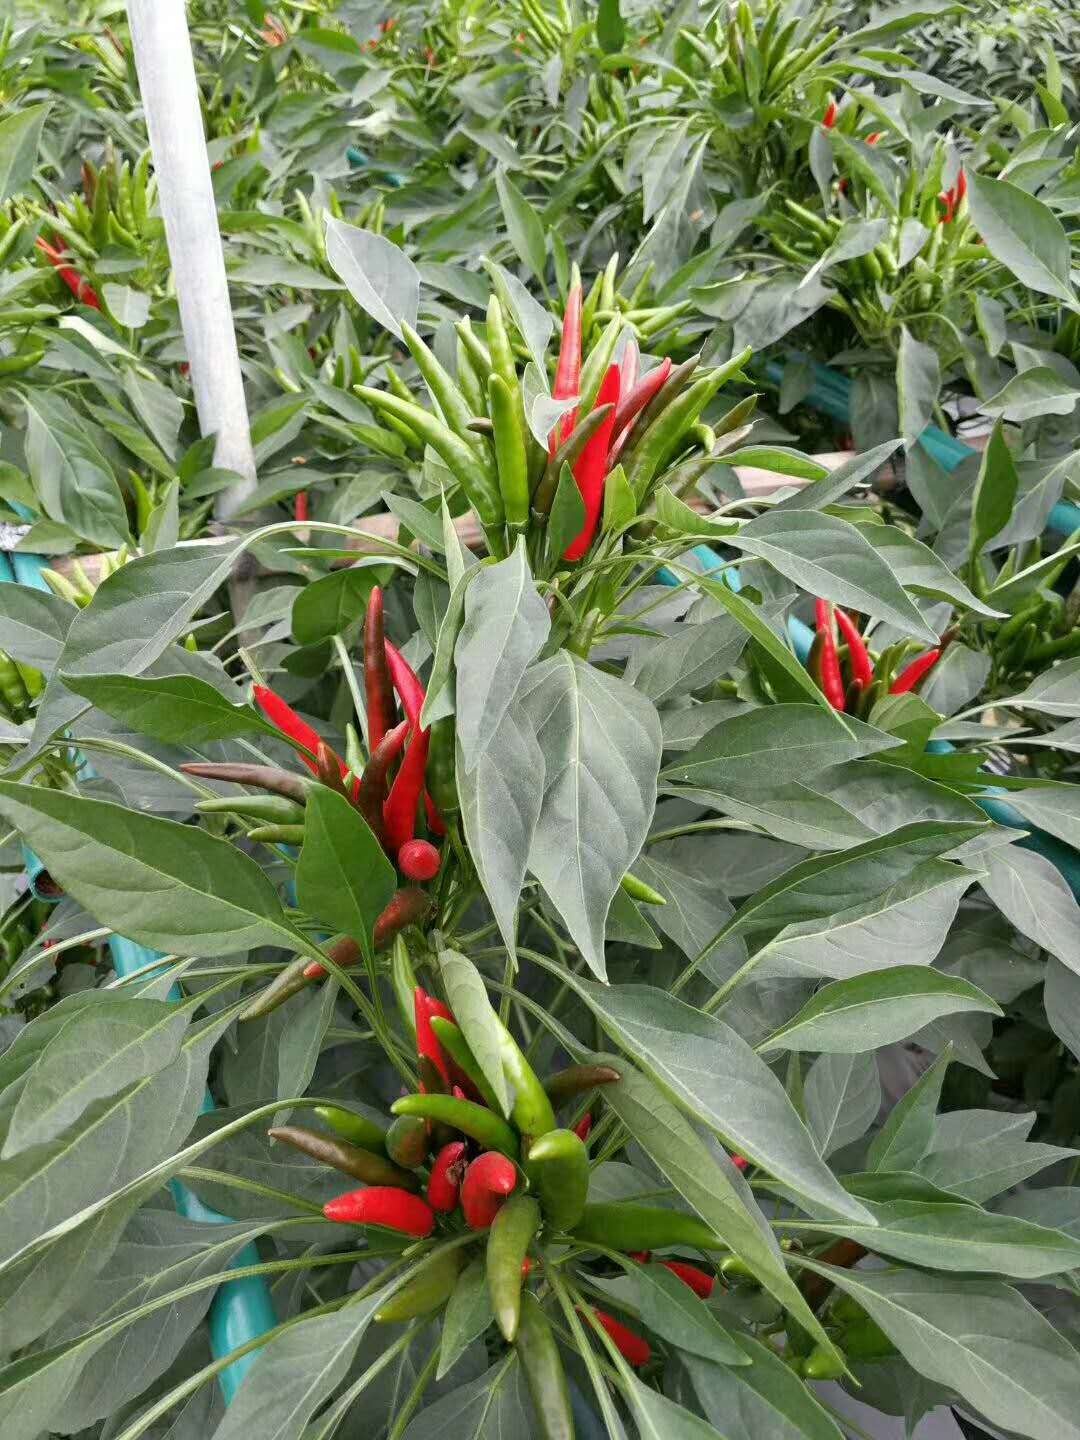 F1 Red Cluster Pepper Chilli Seeds Vegetable Seeds For Growing-Sky King Star No.2